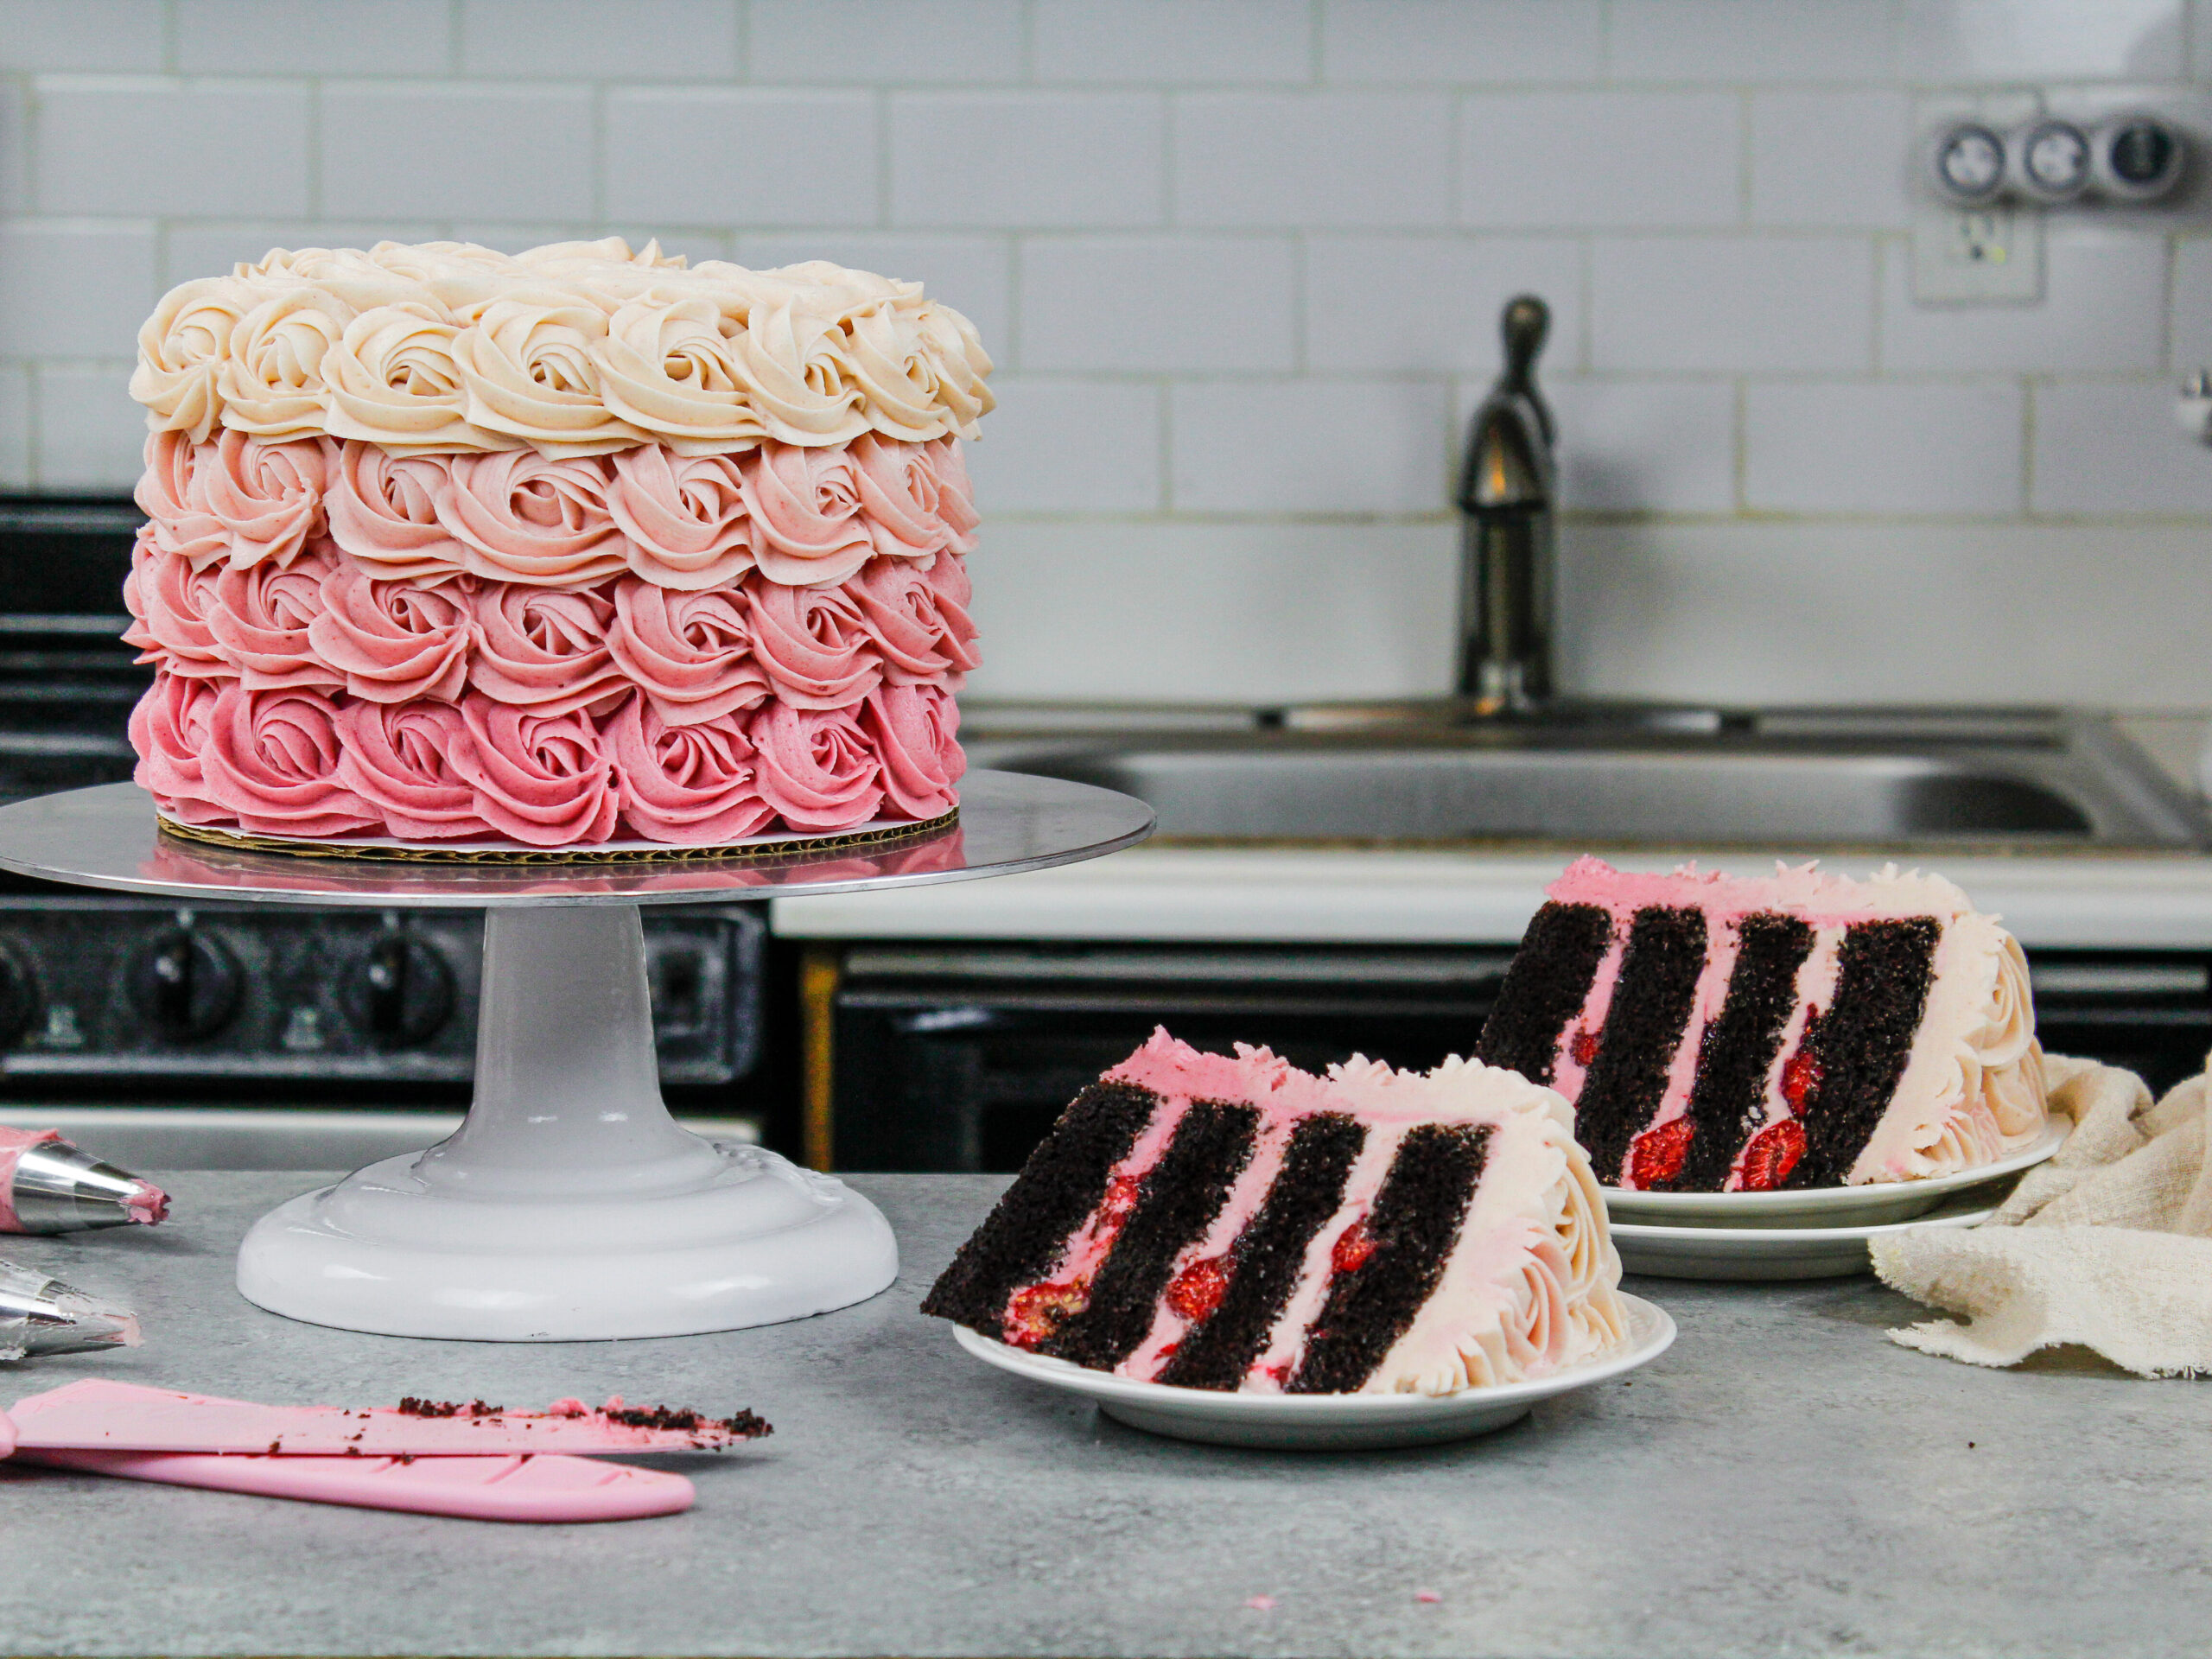 image of a chocolate raspberry cake that's been decorated with ombre buttercream rosettes